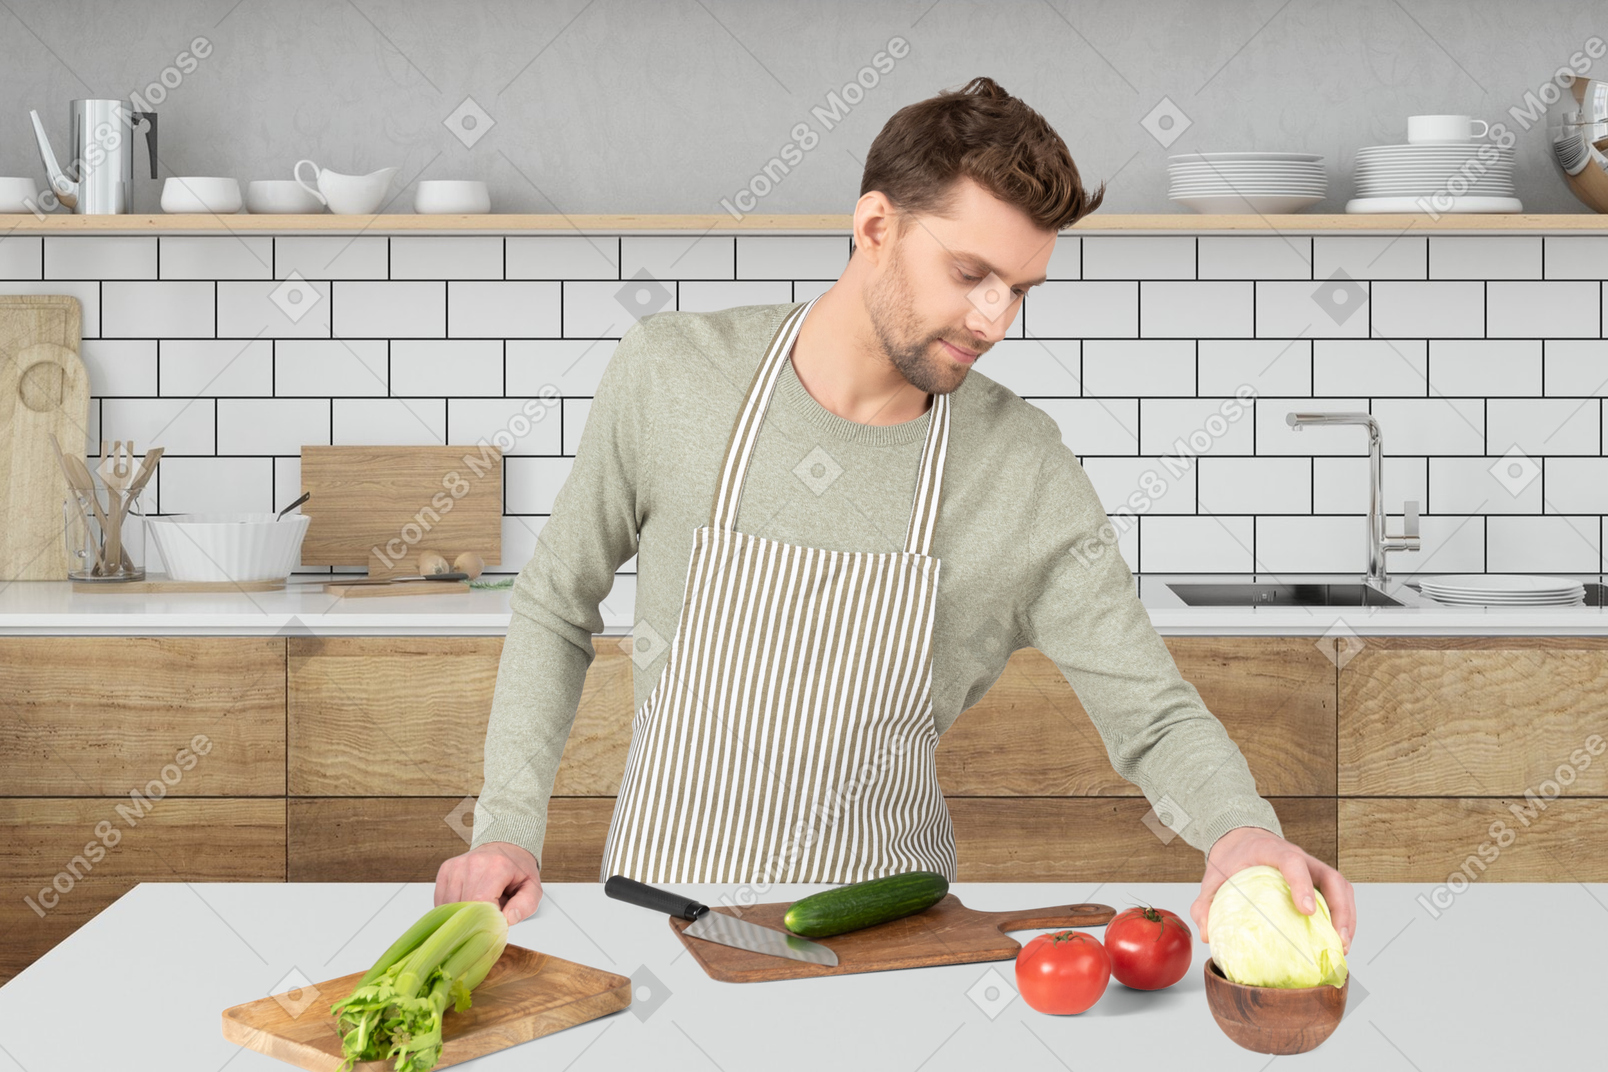 A man in an apron chopping vegetables on a cutting board